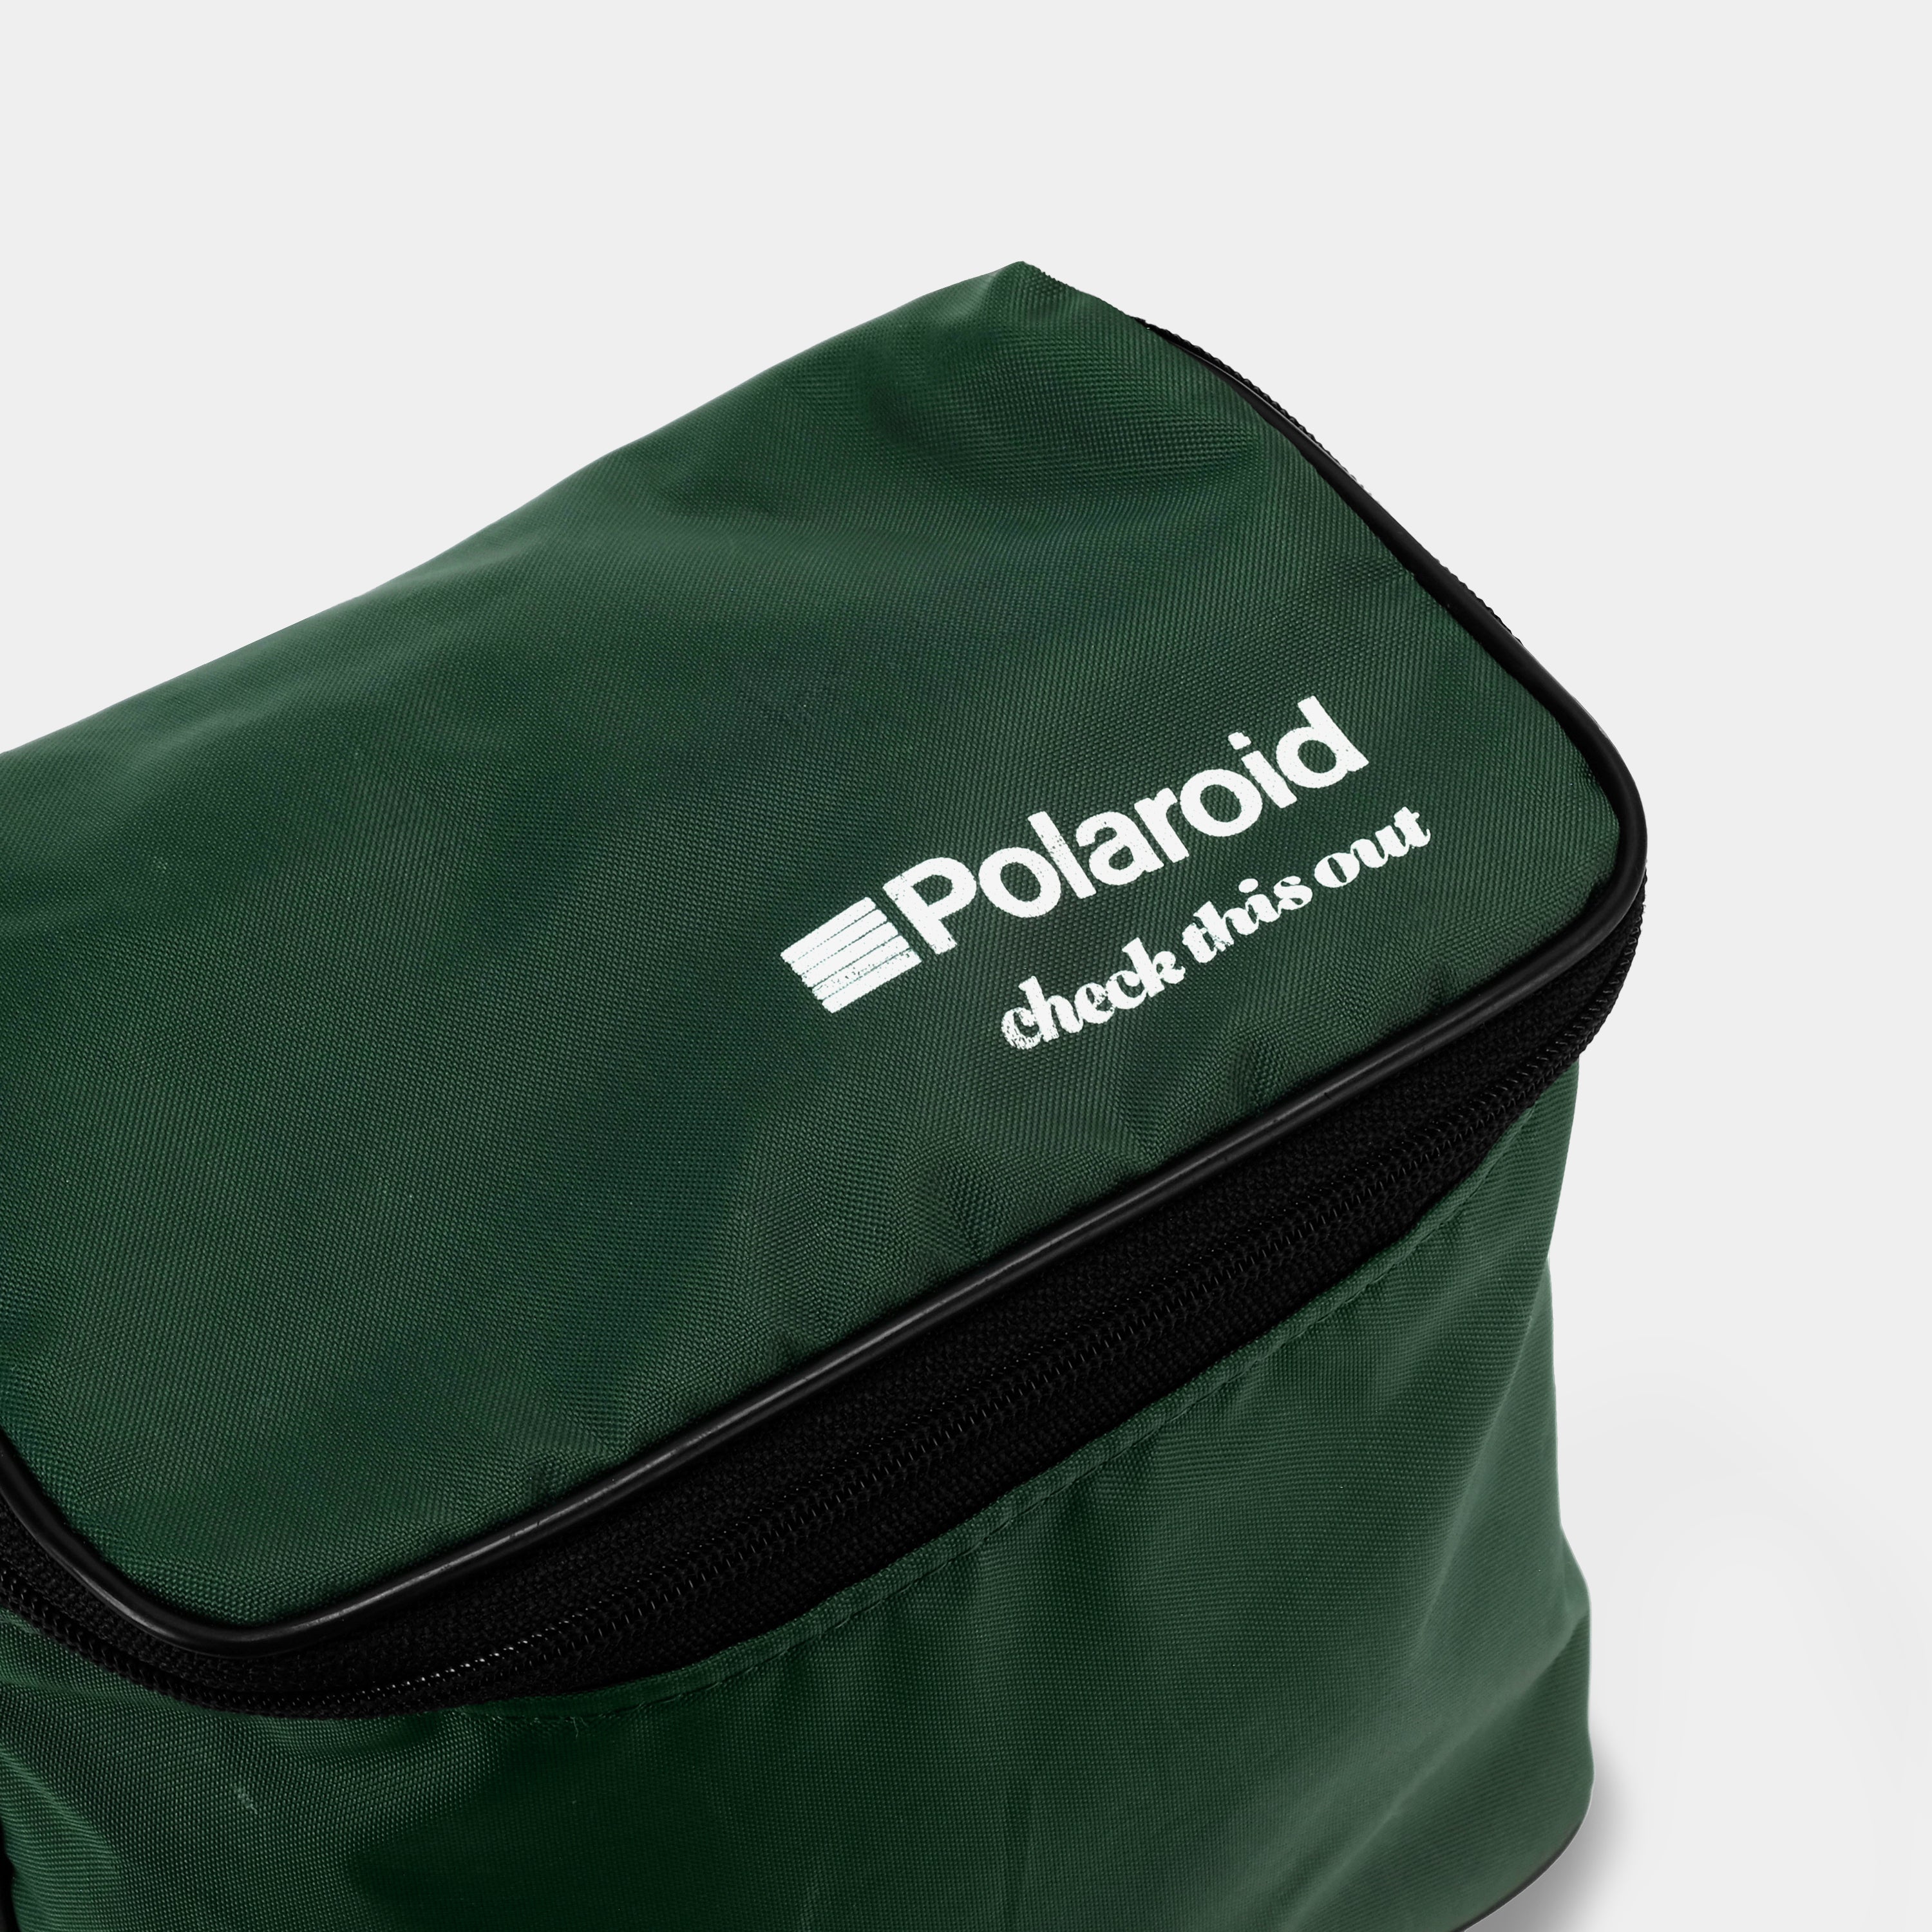 Polaroid Green "Check This Out" Instant Camera Bag